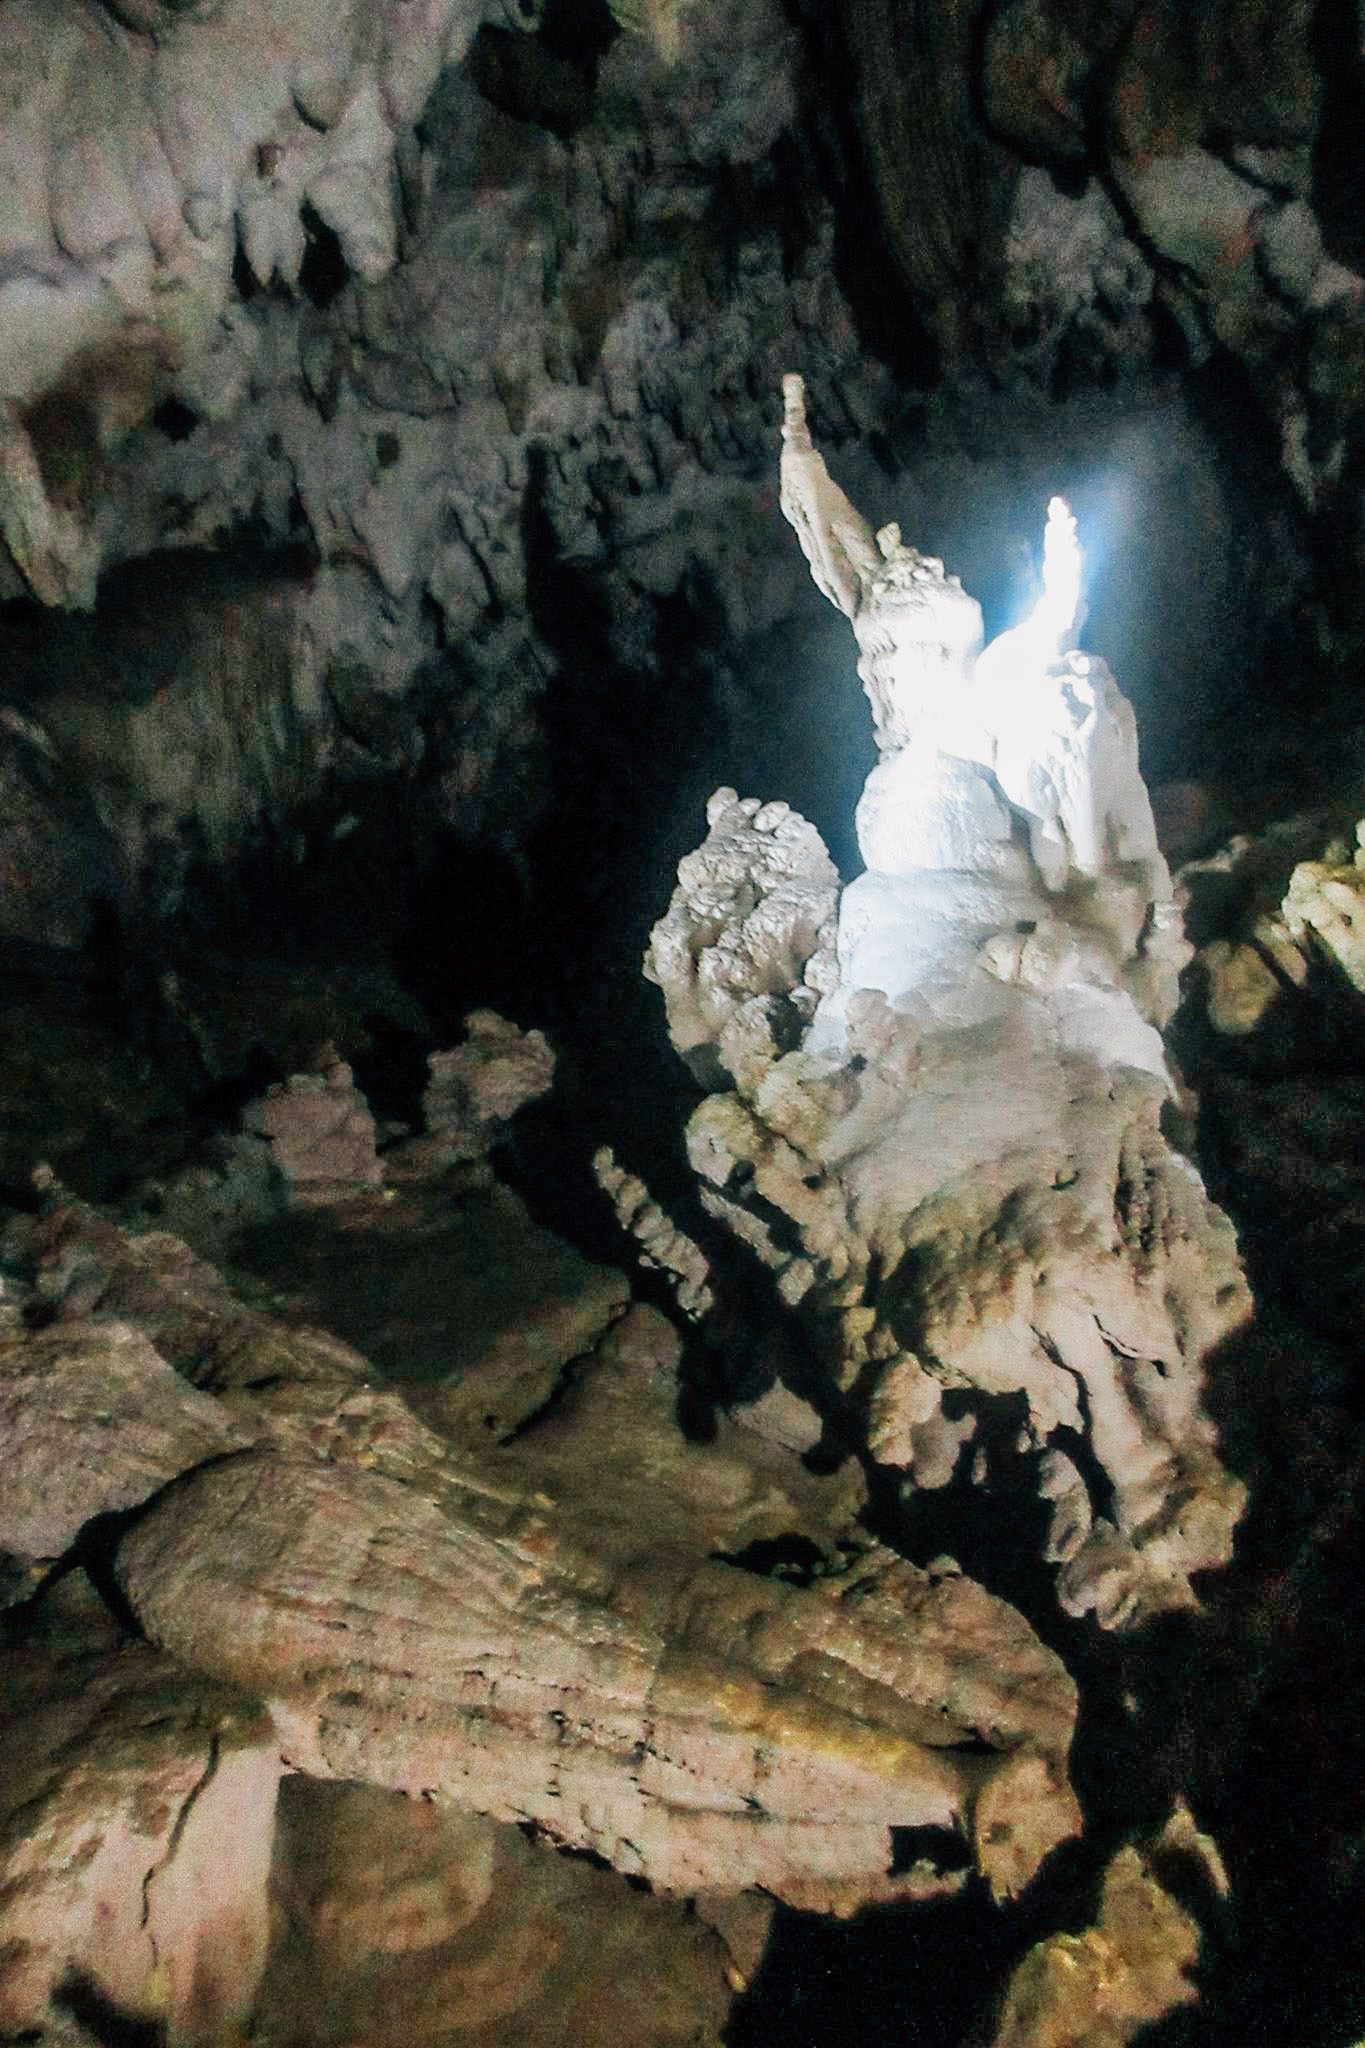 IMAGINATION. What is it? It looks like an angel, use your imagination when exploring the caves in Sohoton National Park. Photo by Josh Berida 